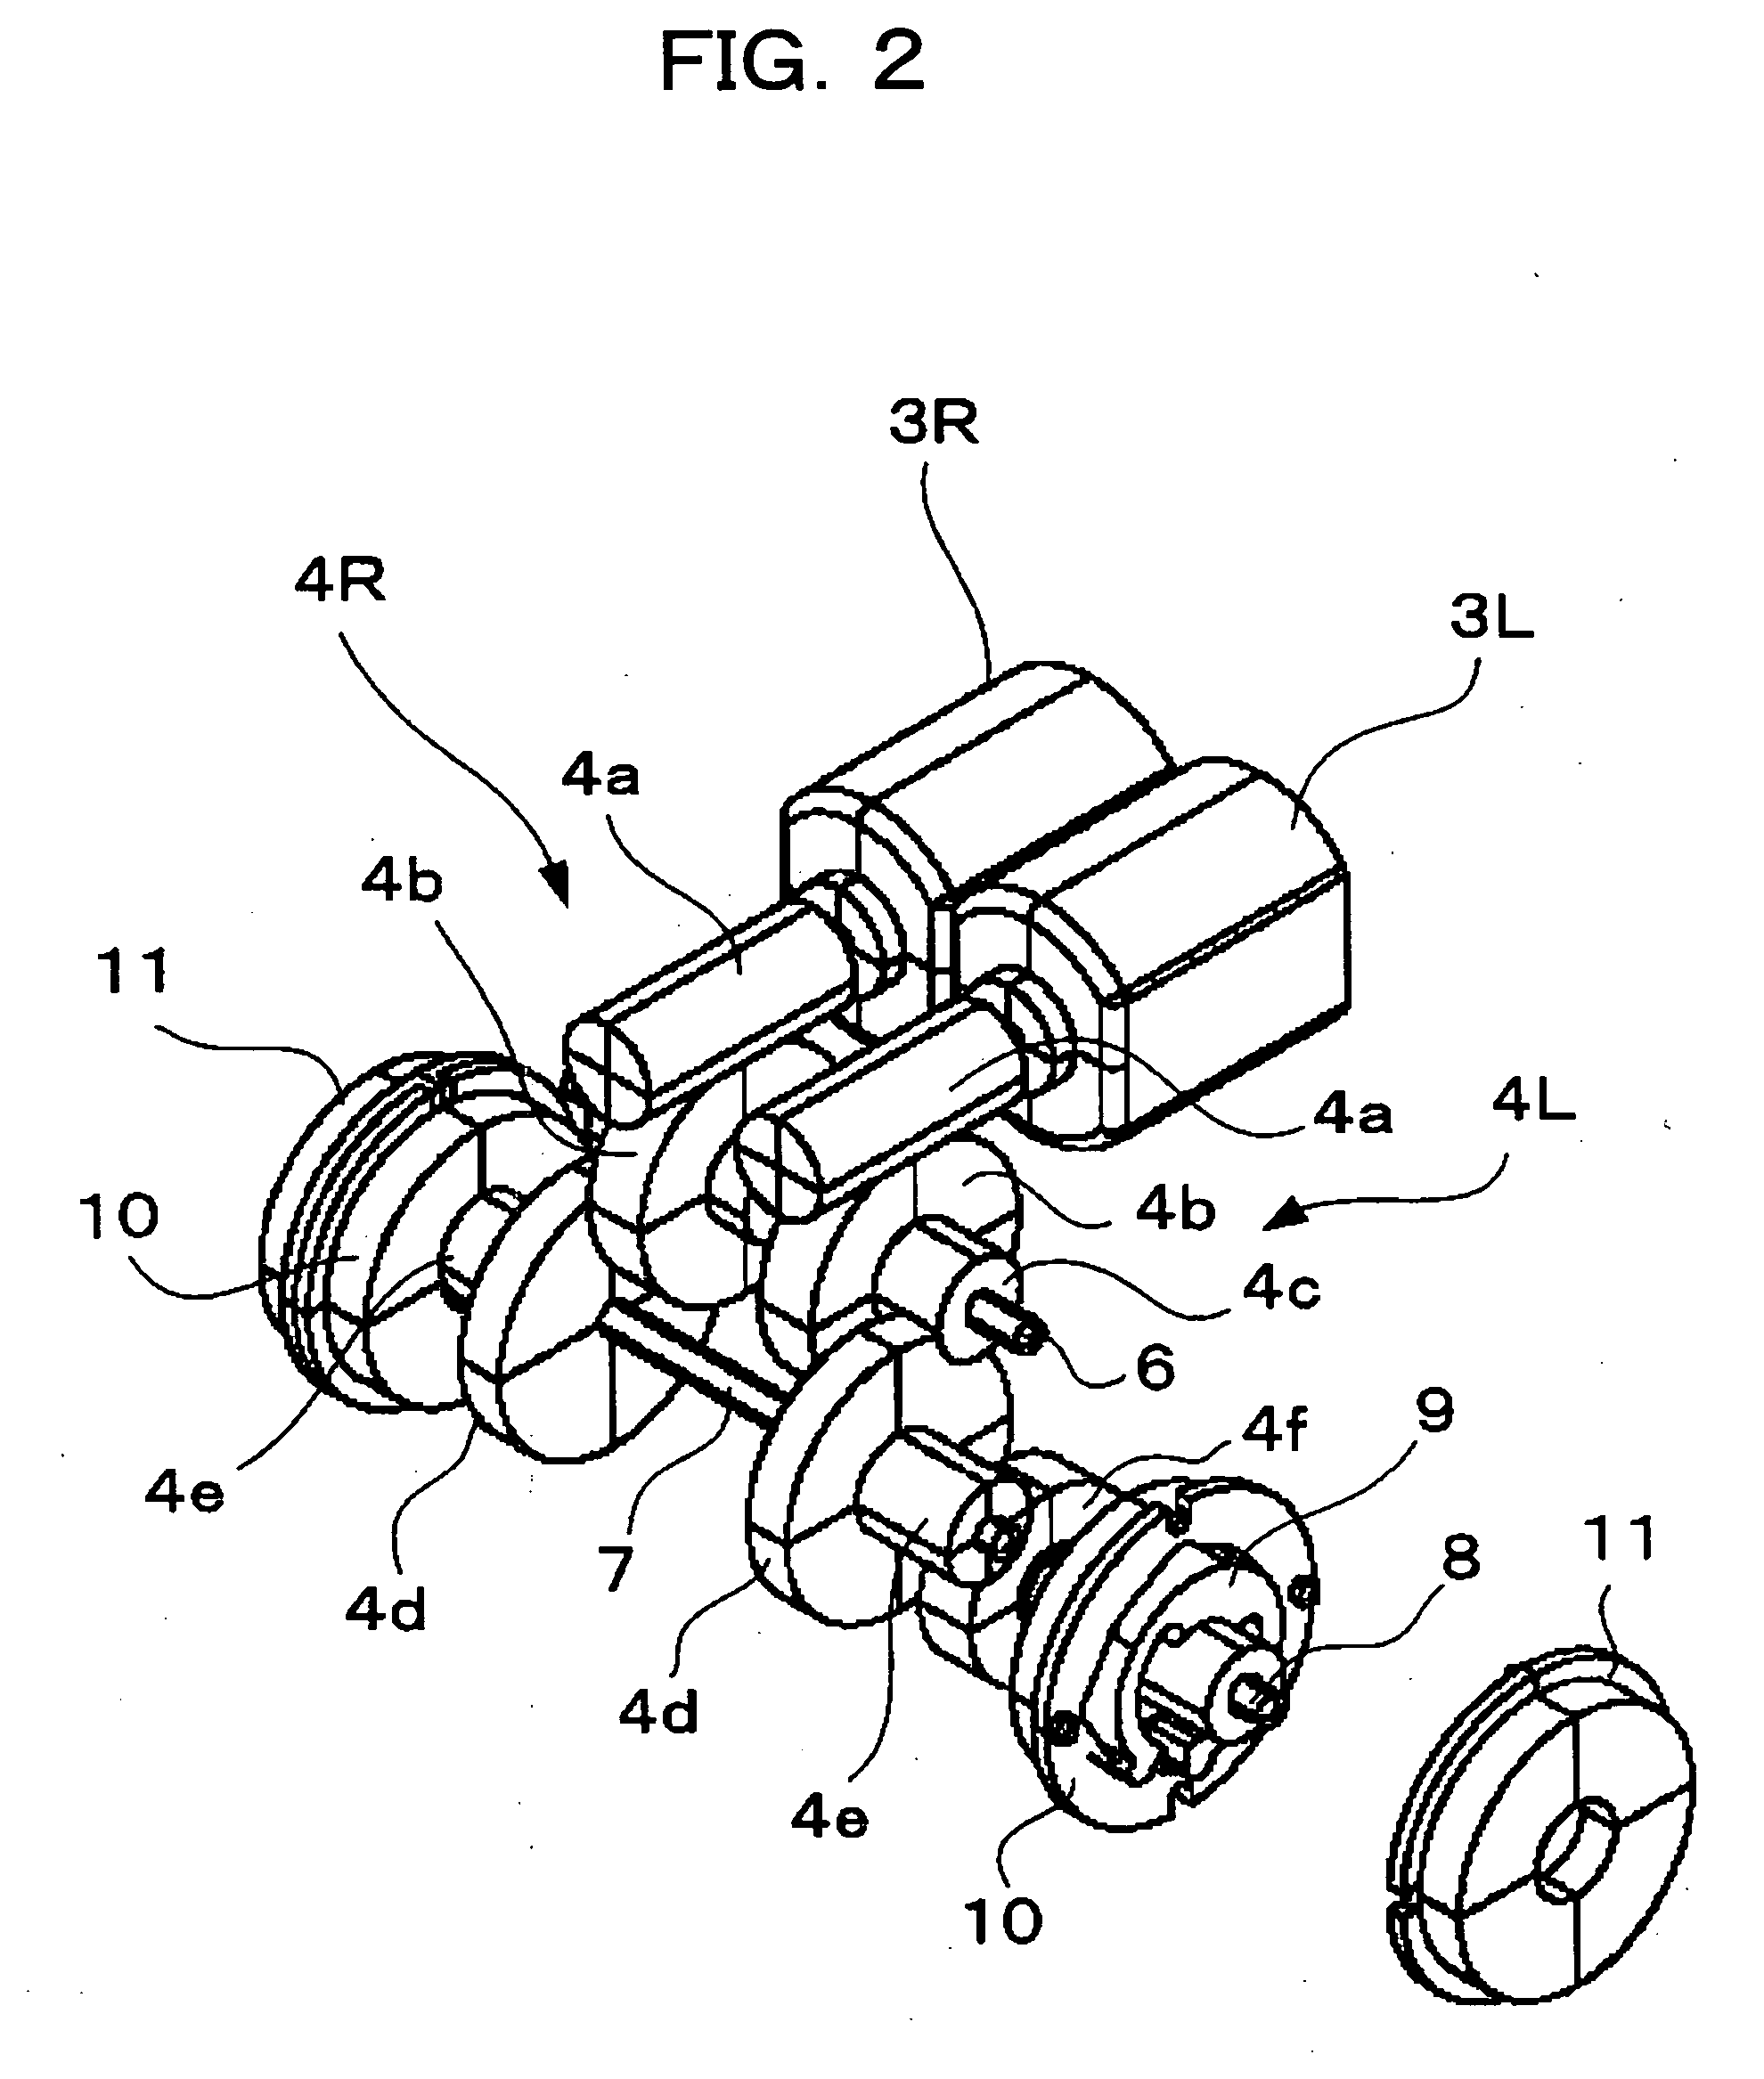 Traveling device and power limiting mechanism